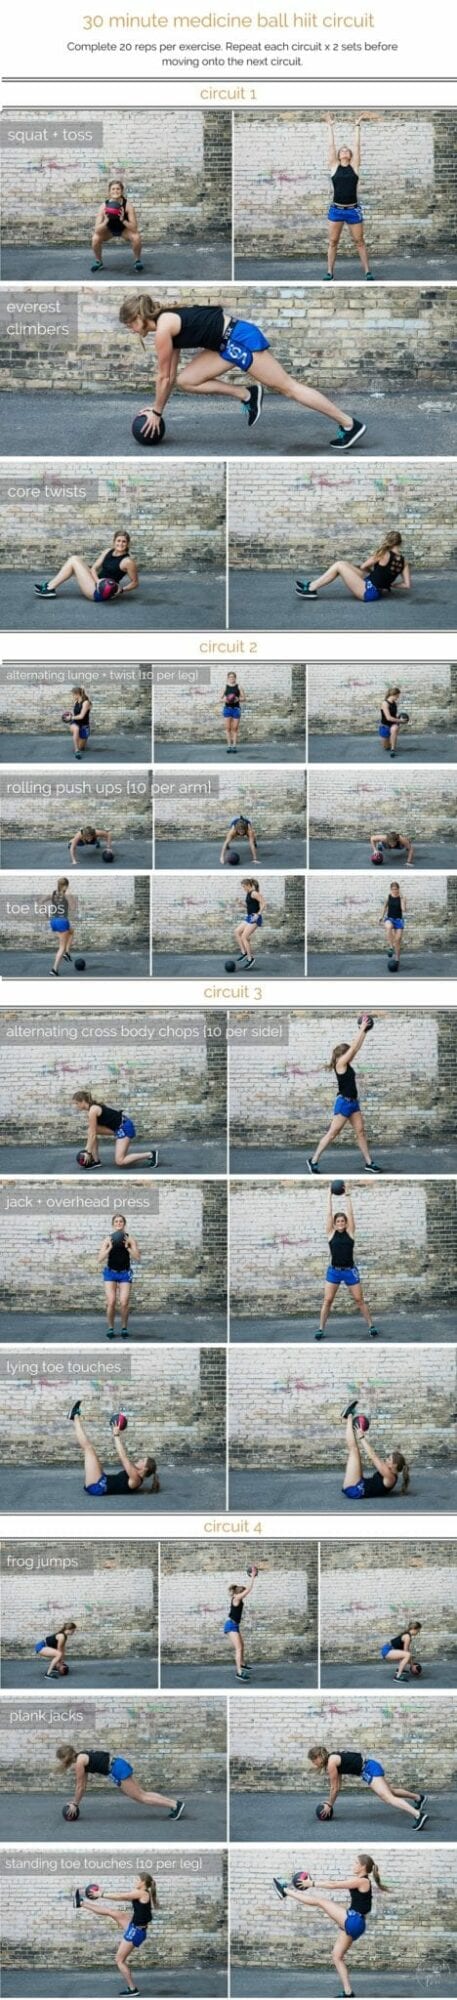 medicine ball hiit circuit workout | combine cardio, strength and stability in this medicine ball hiit circuit; a total body workout that you can do in 30 minutes or less. | www.nourishmovelove.com